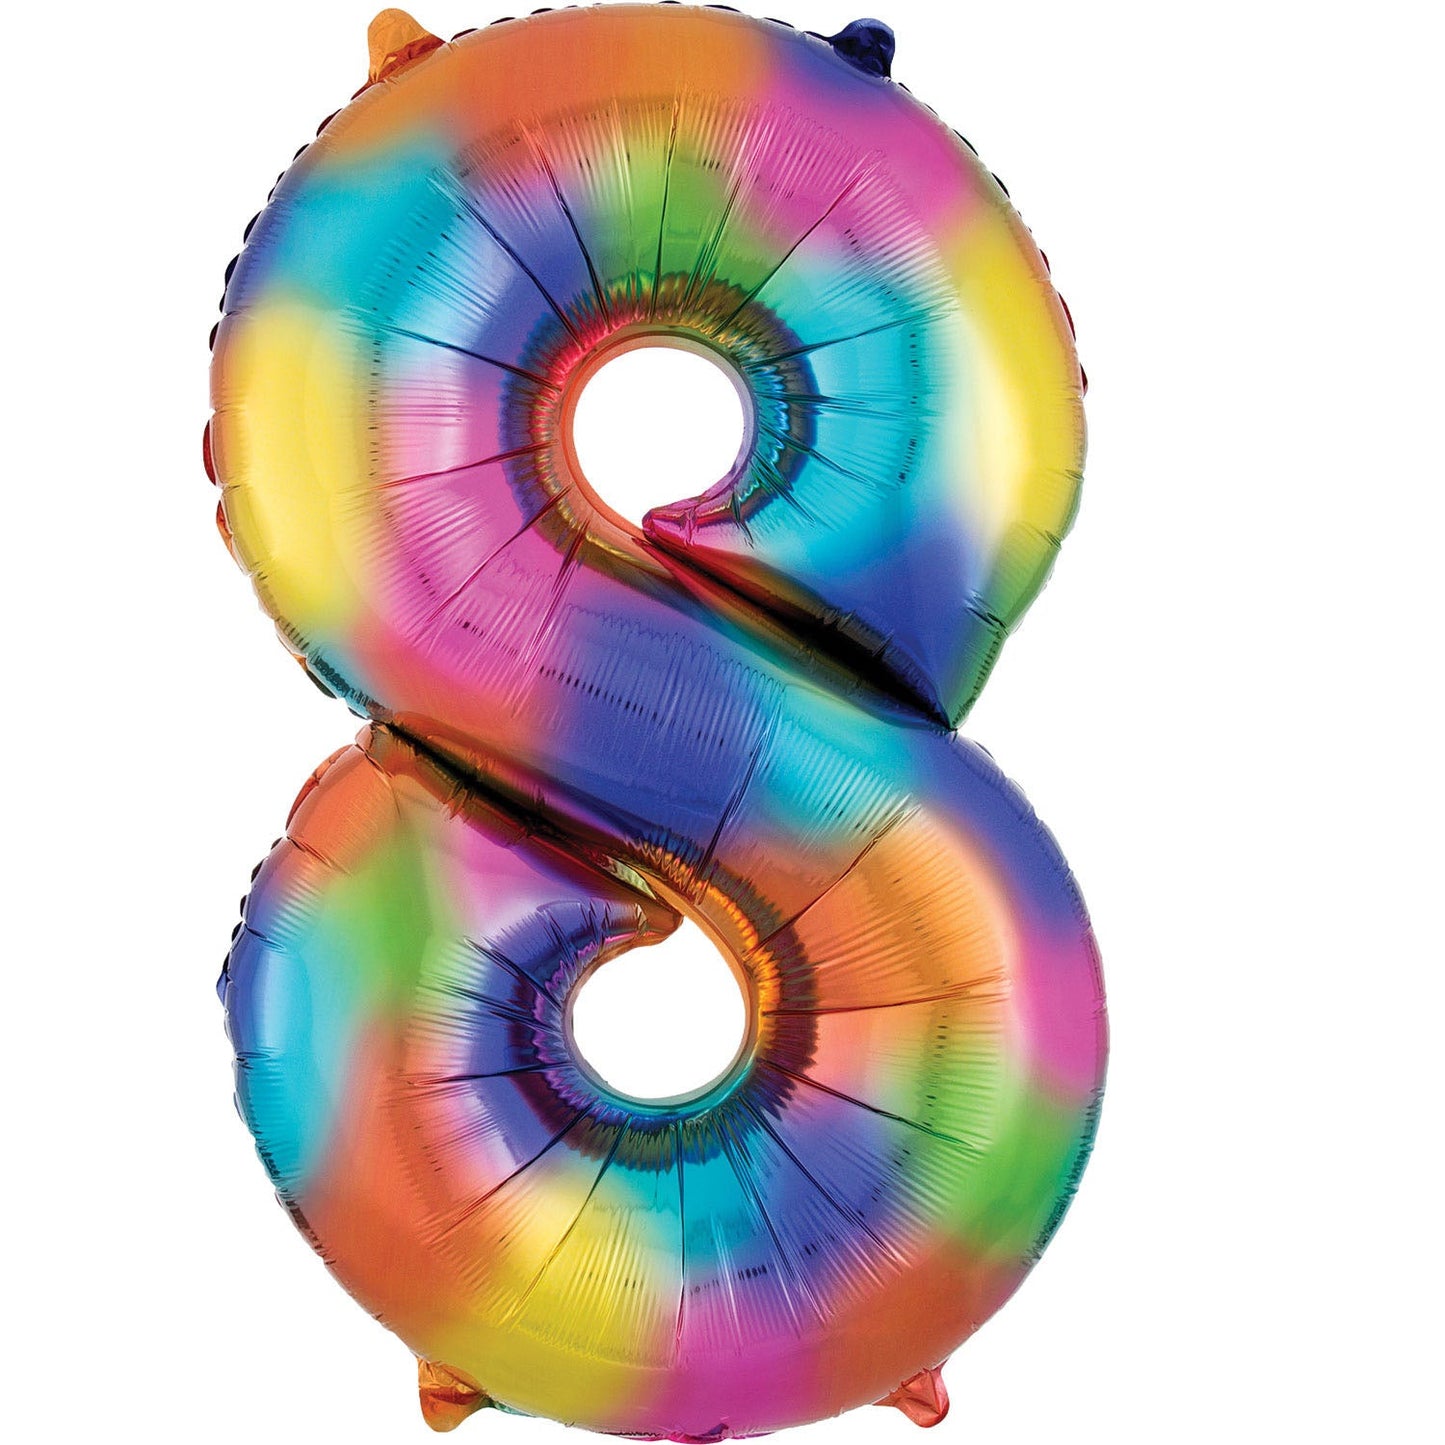 Rainbow Splash Supershape Number 8 Foil Balloon 86cm (34in) height by 53cm (21in) width Balloon is sold uninflated. Can be inflated with air or helium.